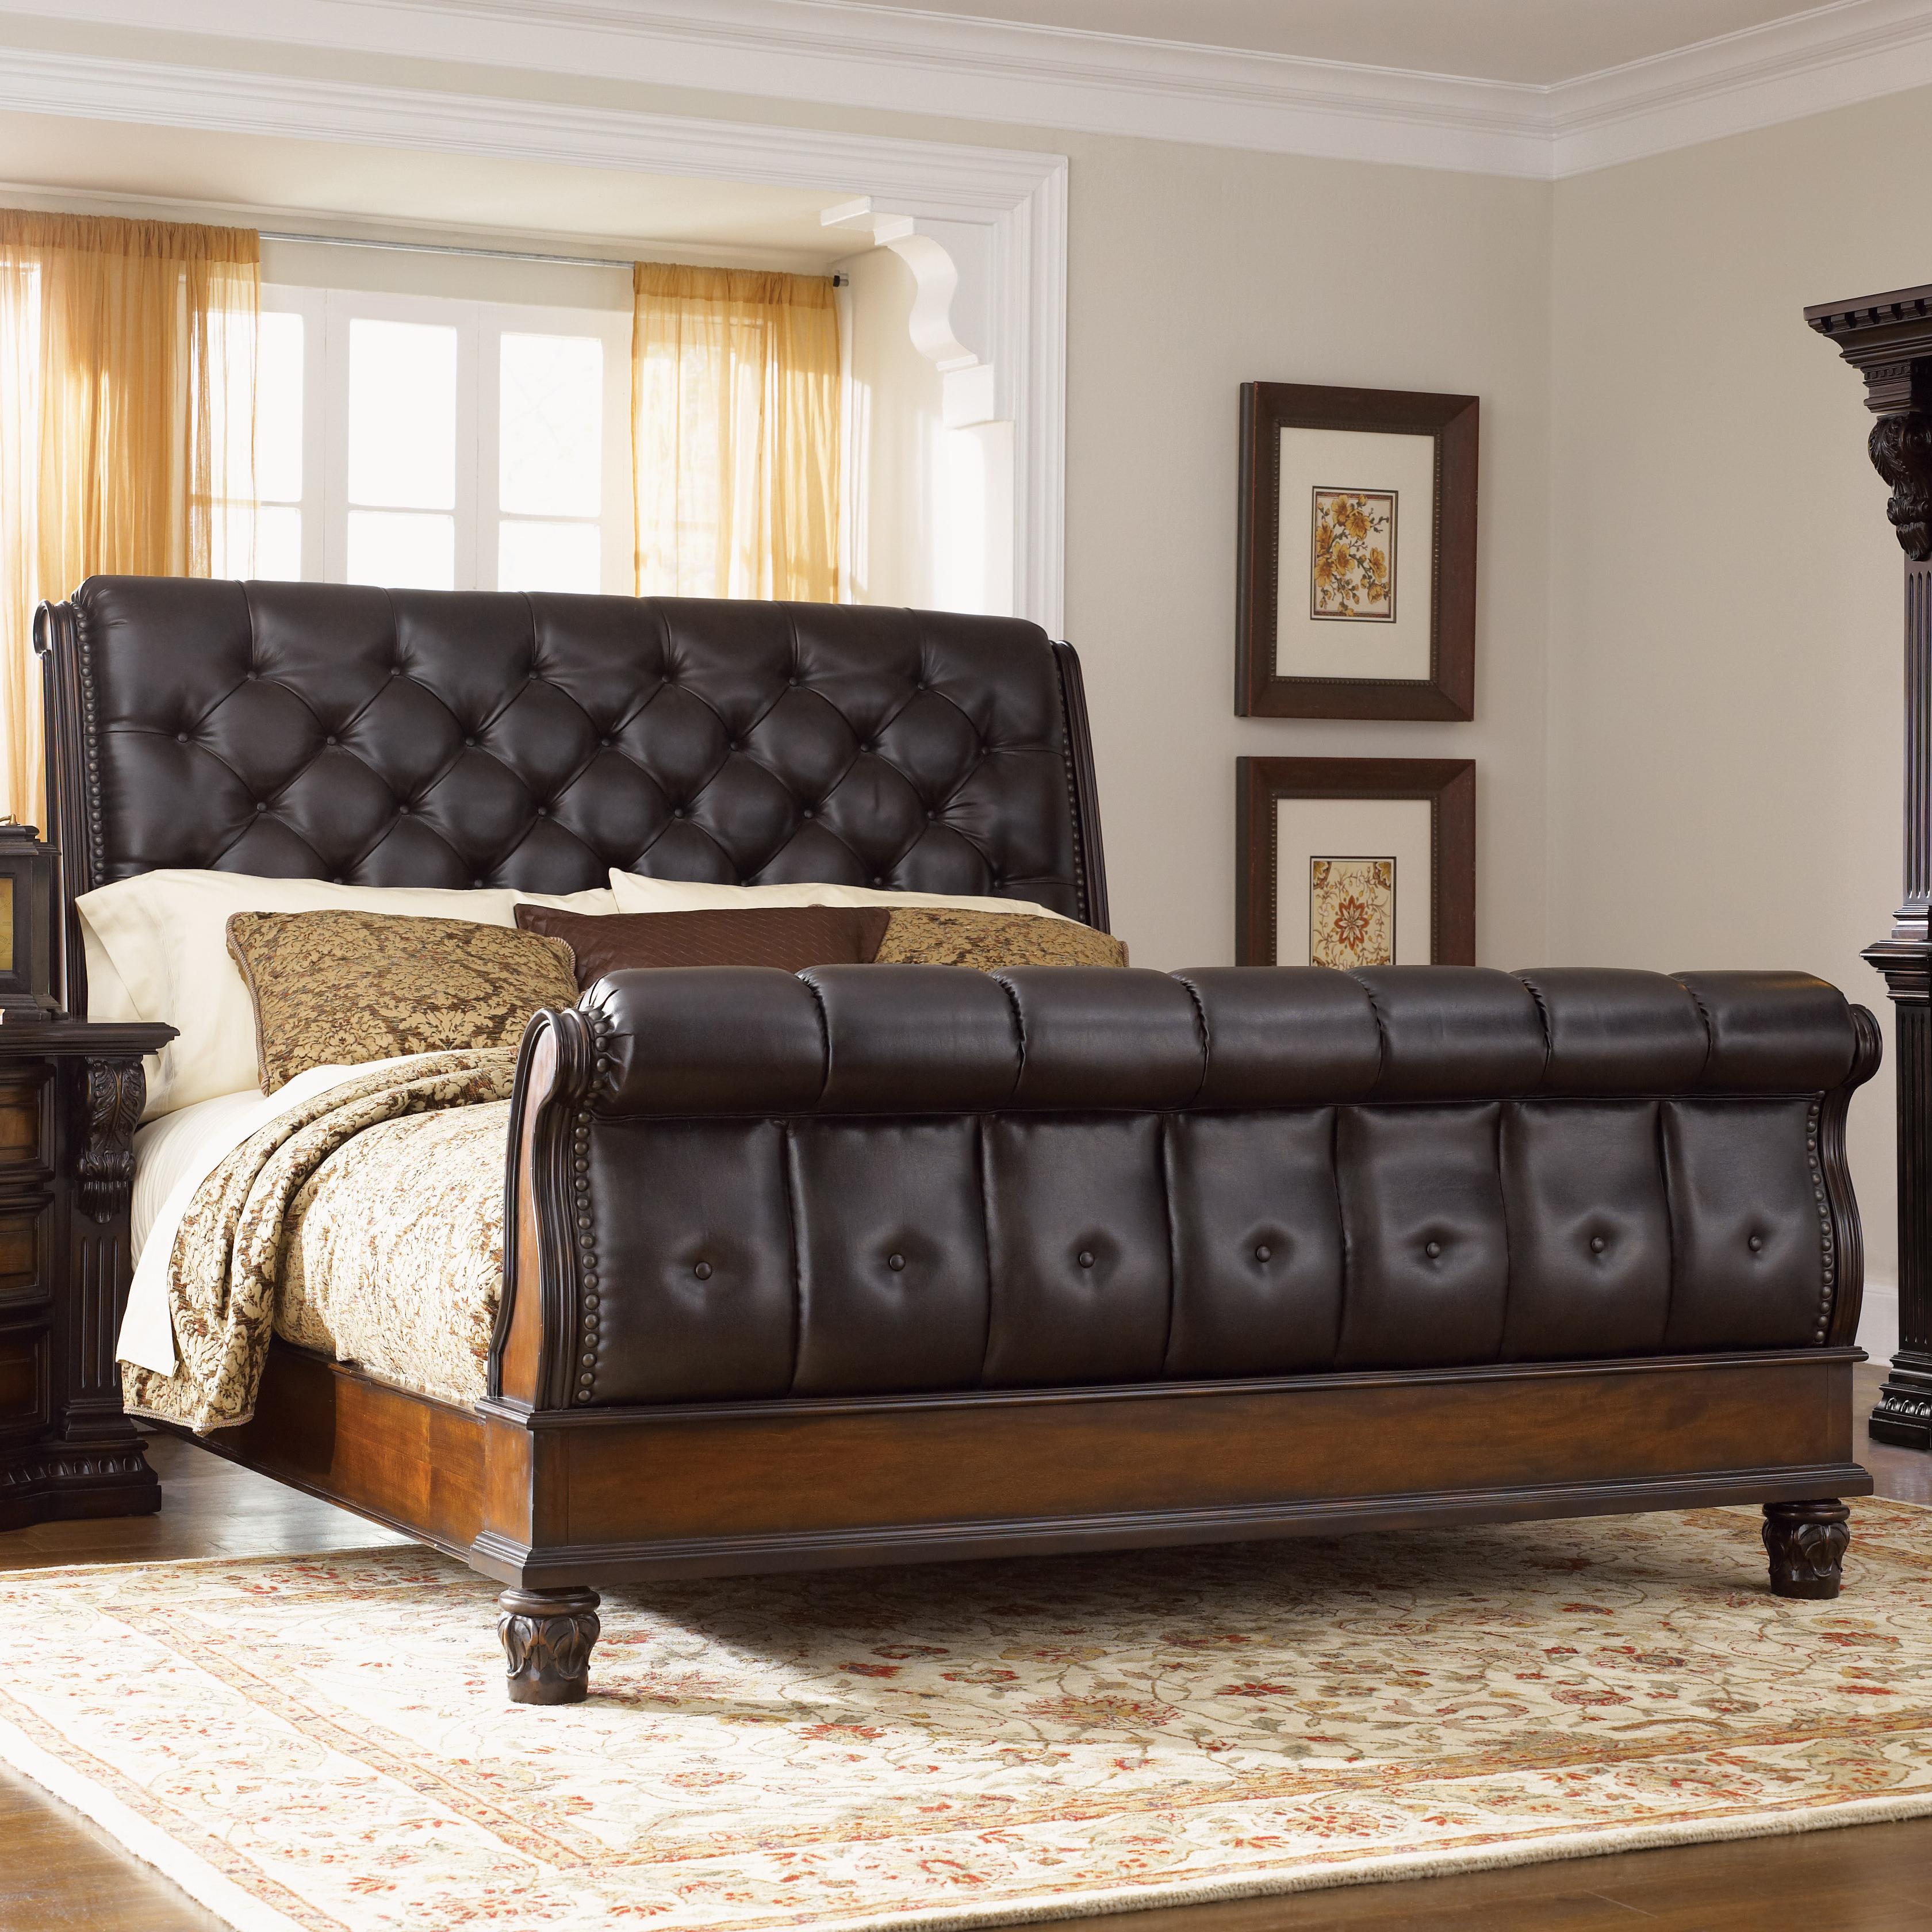 Free Photo King Leather Fabric, California King Leather Sleigh Bed